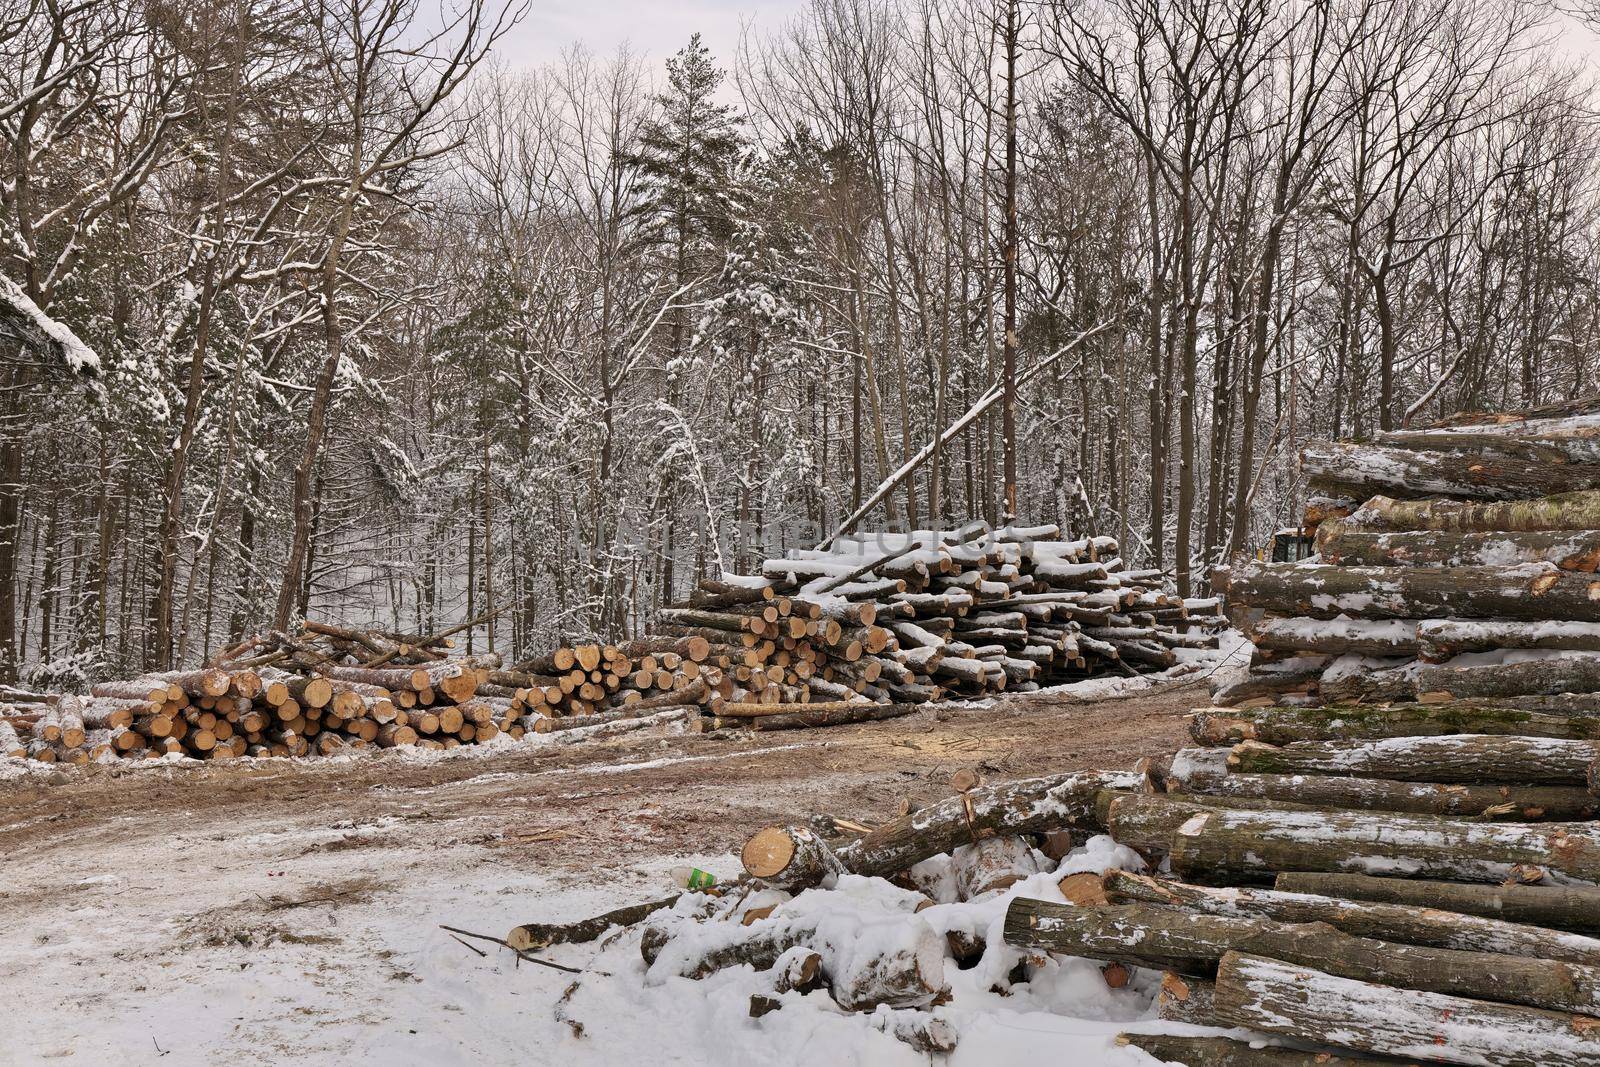 Freshly Harvested Timber from a Logging Operation Piled by the Forest in Winter by markvandam